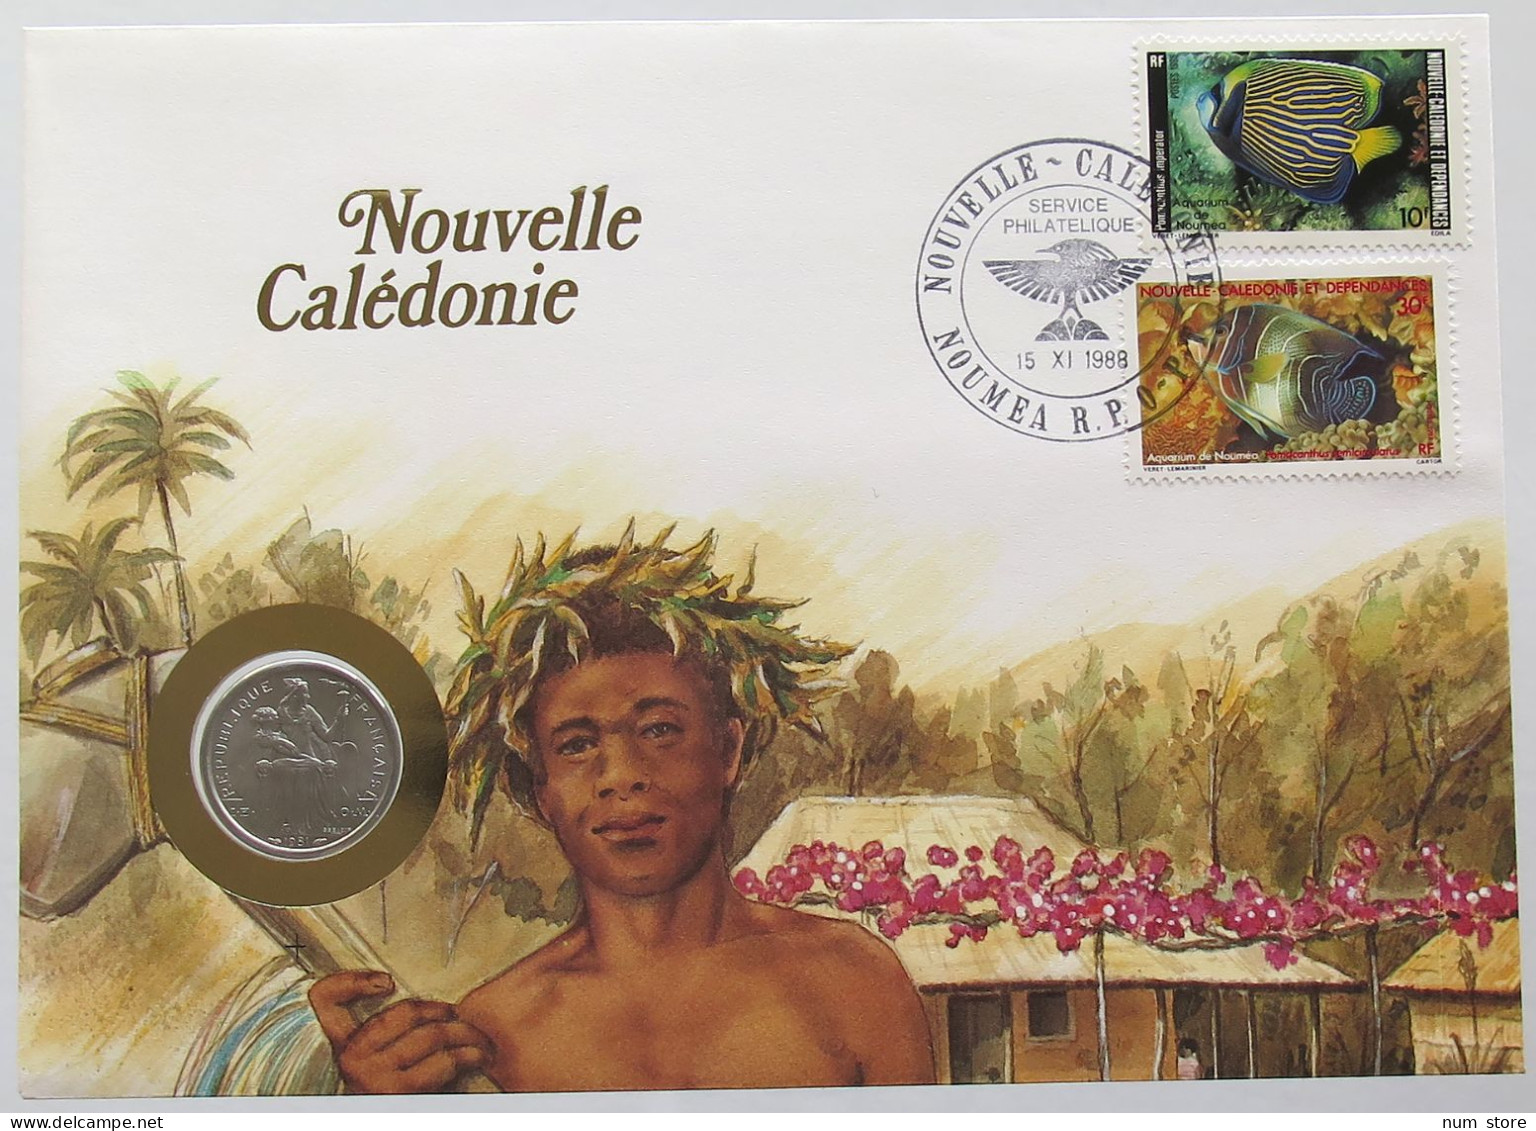 NEW CALEDONIA STATIONERY FRANC 1981  #bs18 0017 - Nouvelle-Calédonie